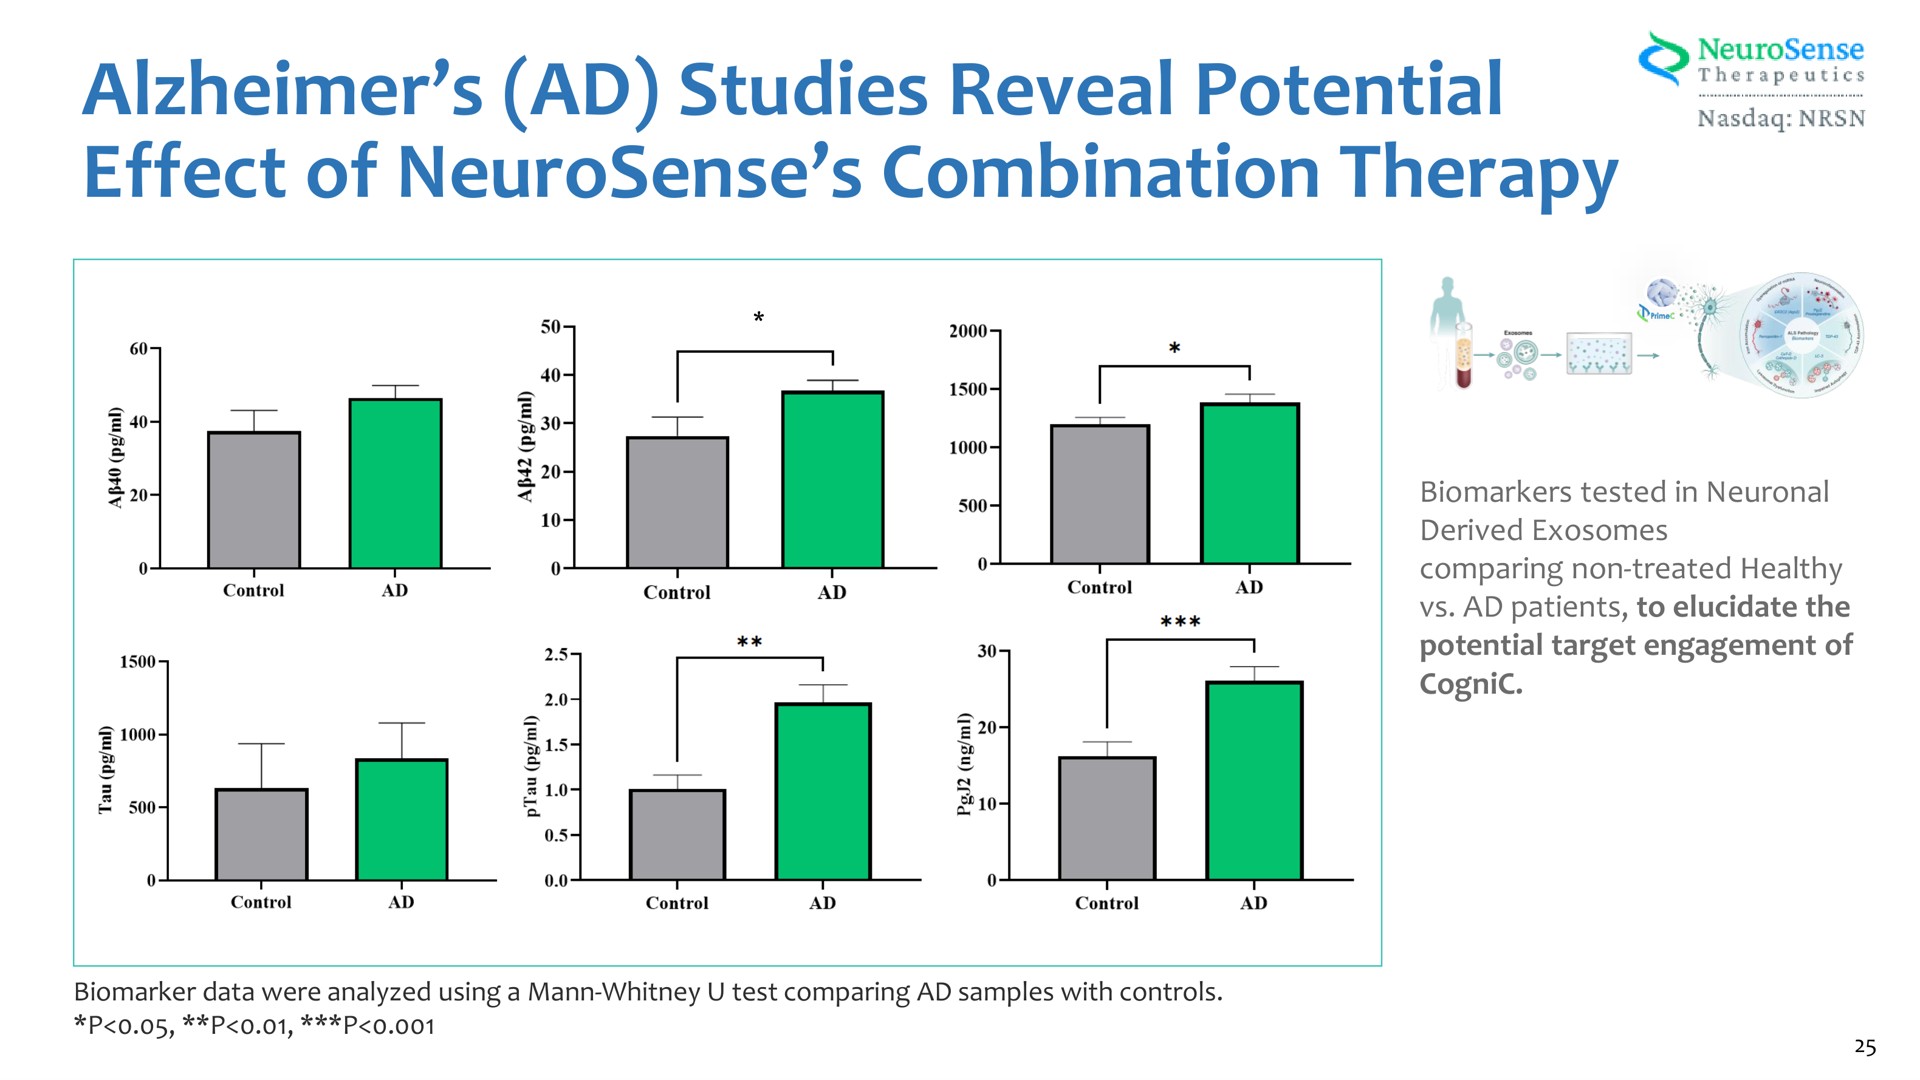 studies reveal potential effect of combination therapy | NeuroSense Therapeutics